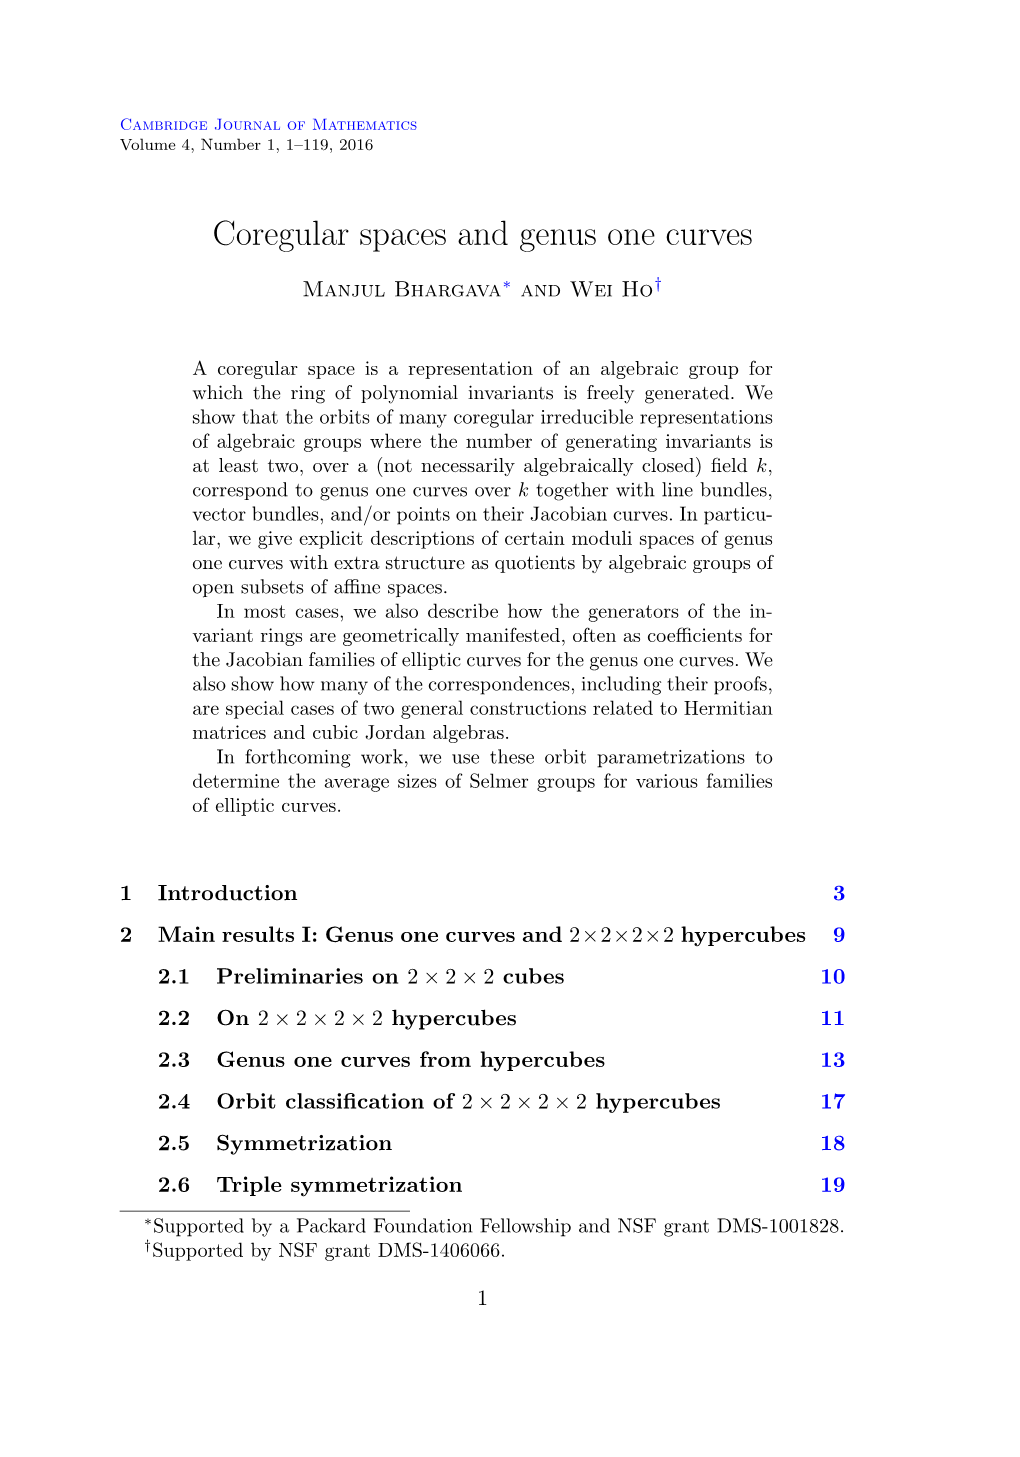 Coregular Spaces and Genus One Curves